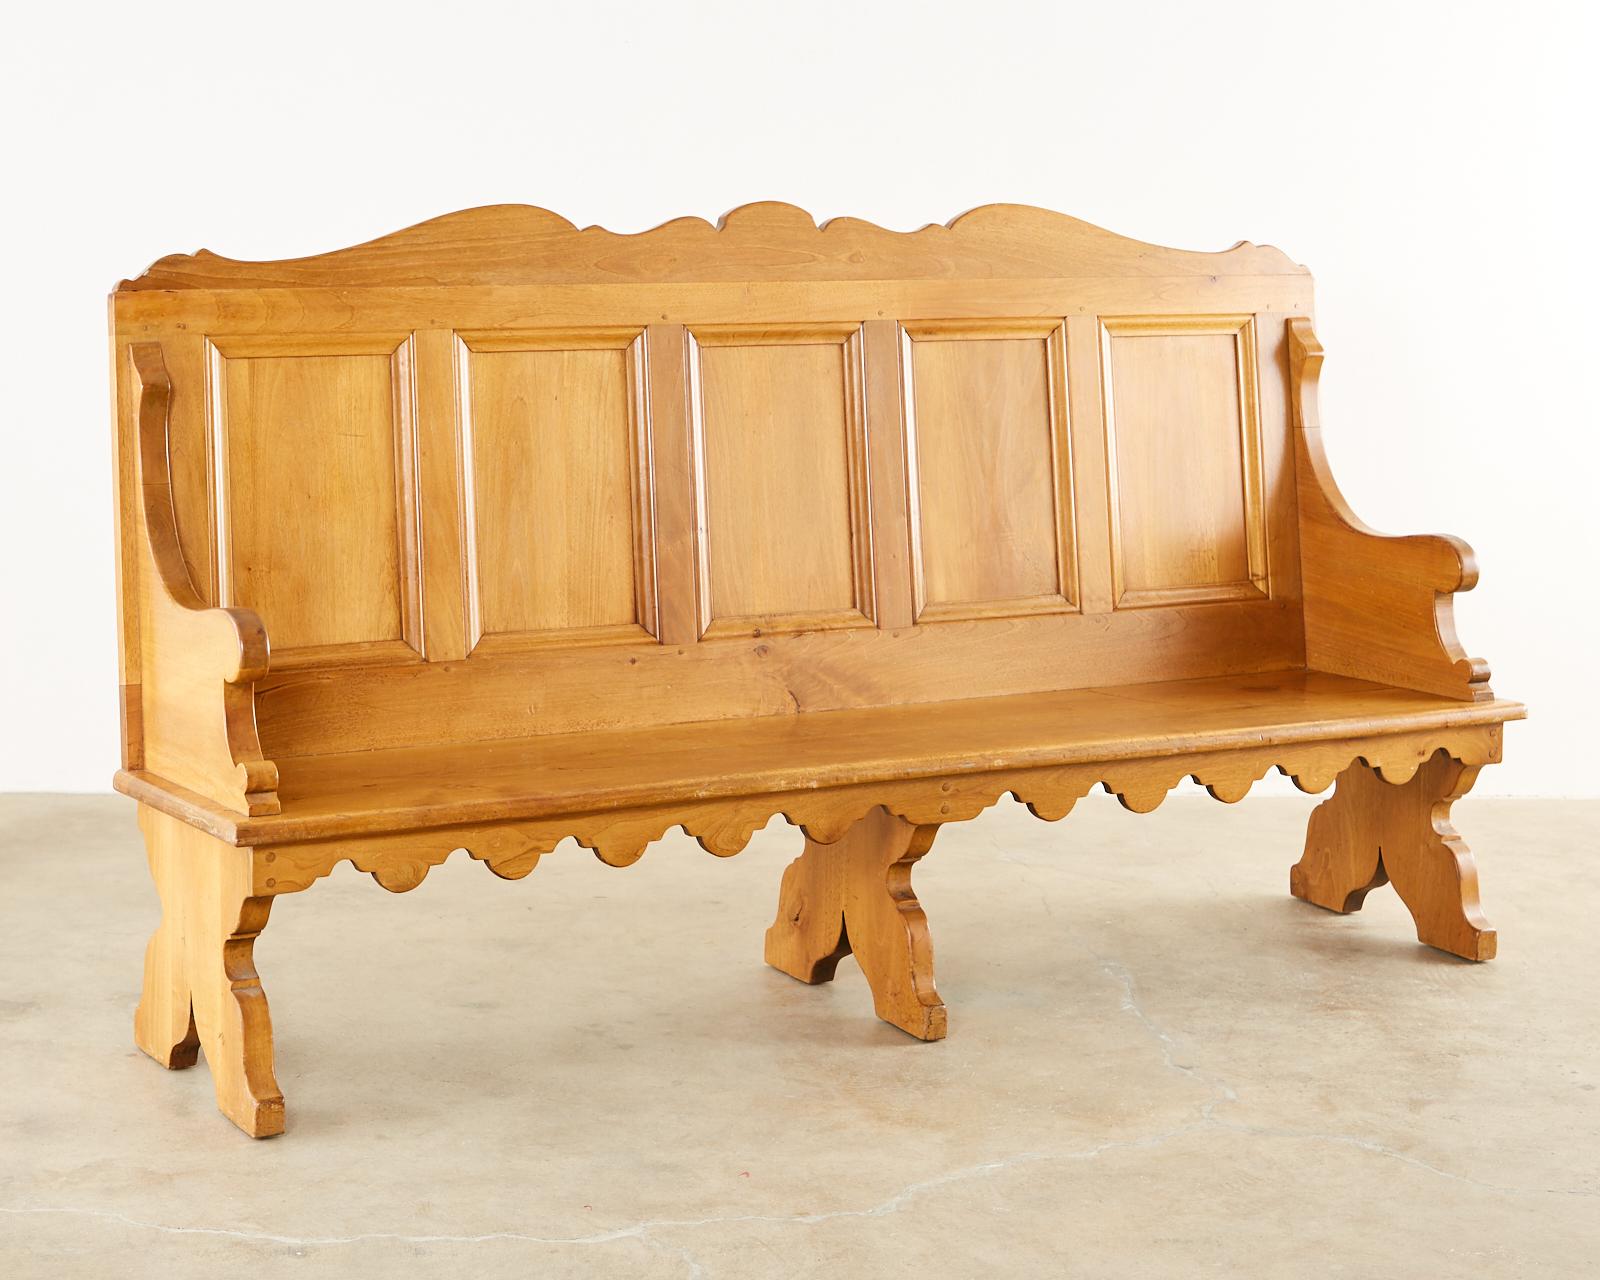 Pair of distinctive gothic revival style church pew benches made by George S. Hunt designer/furniture maker in Pasadena, CA. Beautifully crafted with a paneled back and gracefully curved arms. Decorated with a shaped apron on the seat and supported